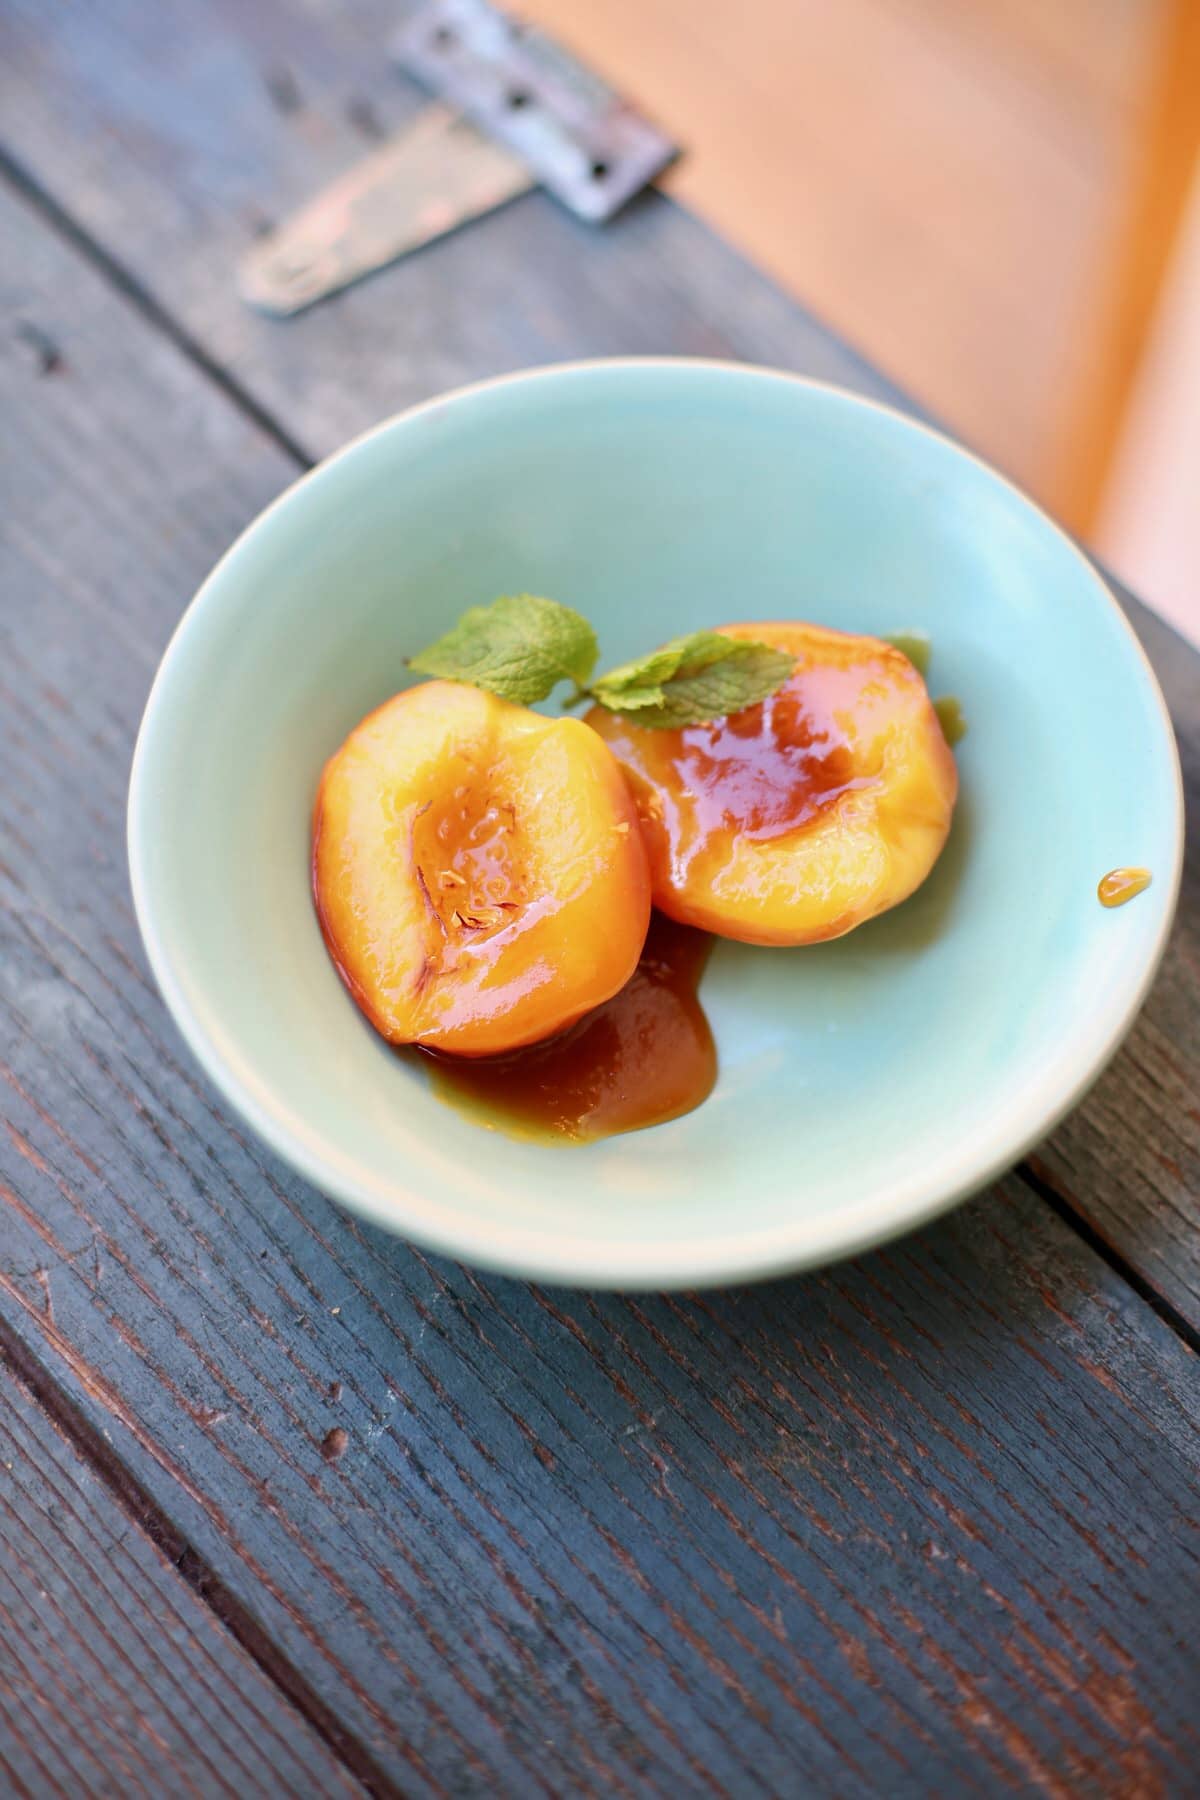 Roasted nectarines in a blue bowl on a blue wooden table